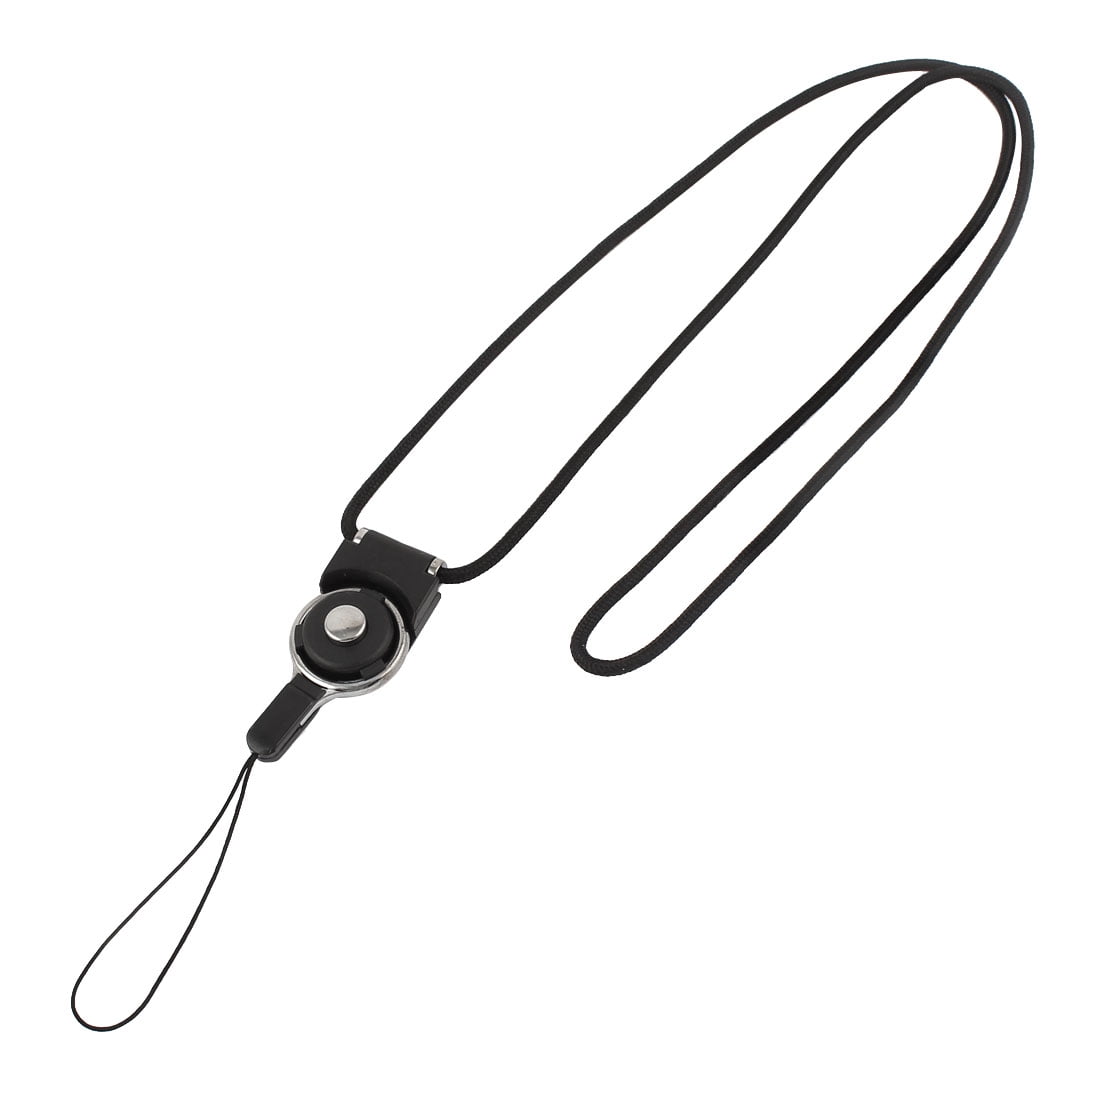 Leather Neck Strap Lanyard 23CM 45CM for Mp3 Cell Phone Ipod Black 1 2 5 pcs BBB 